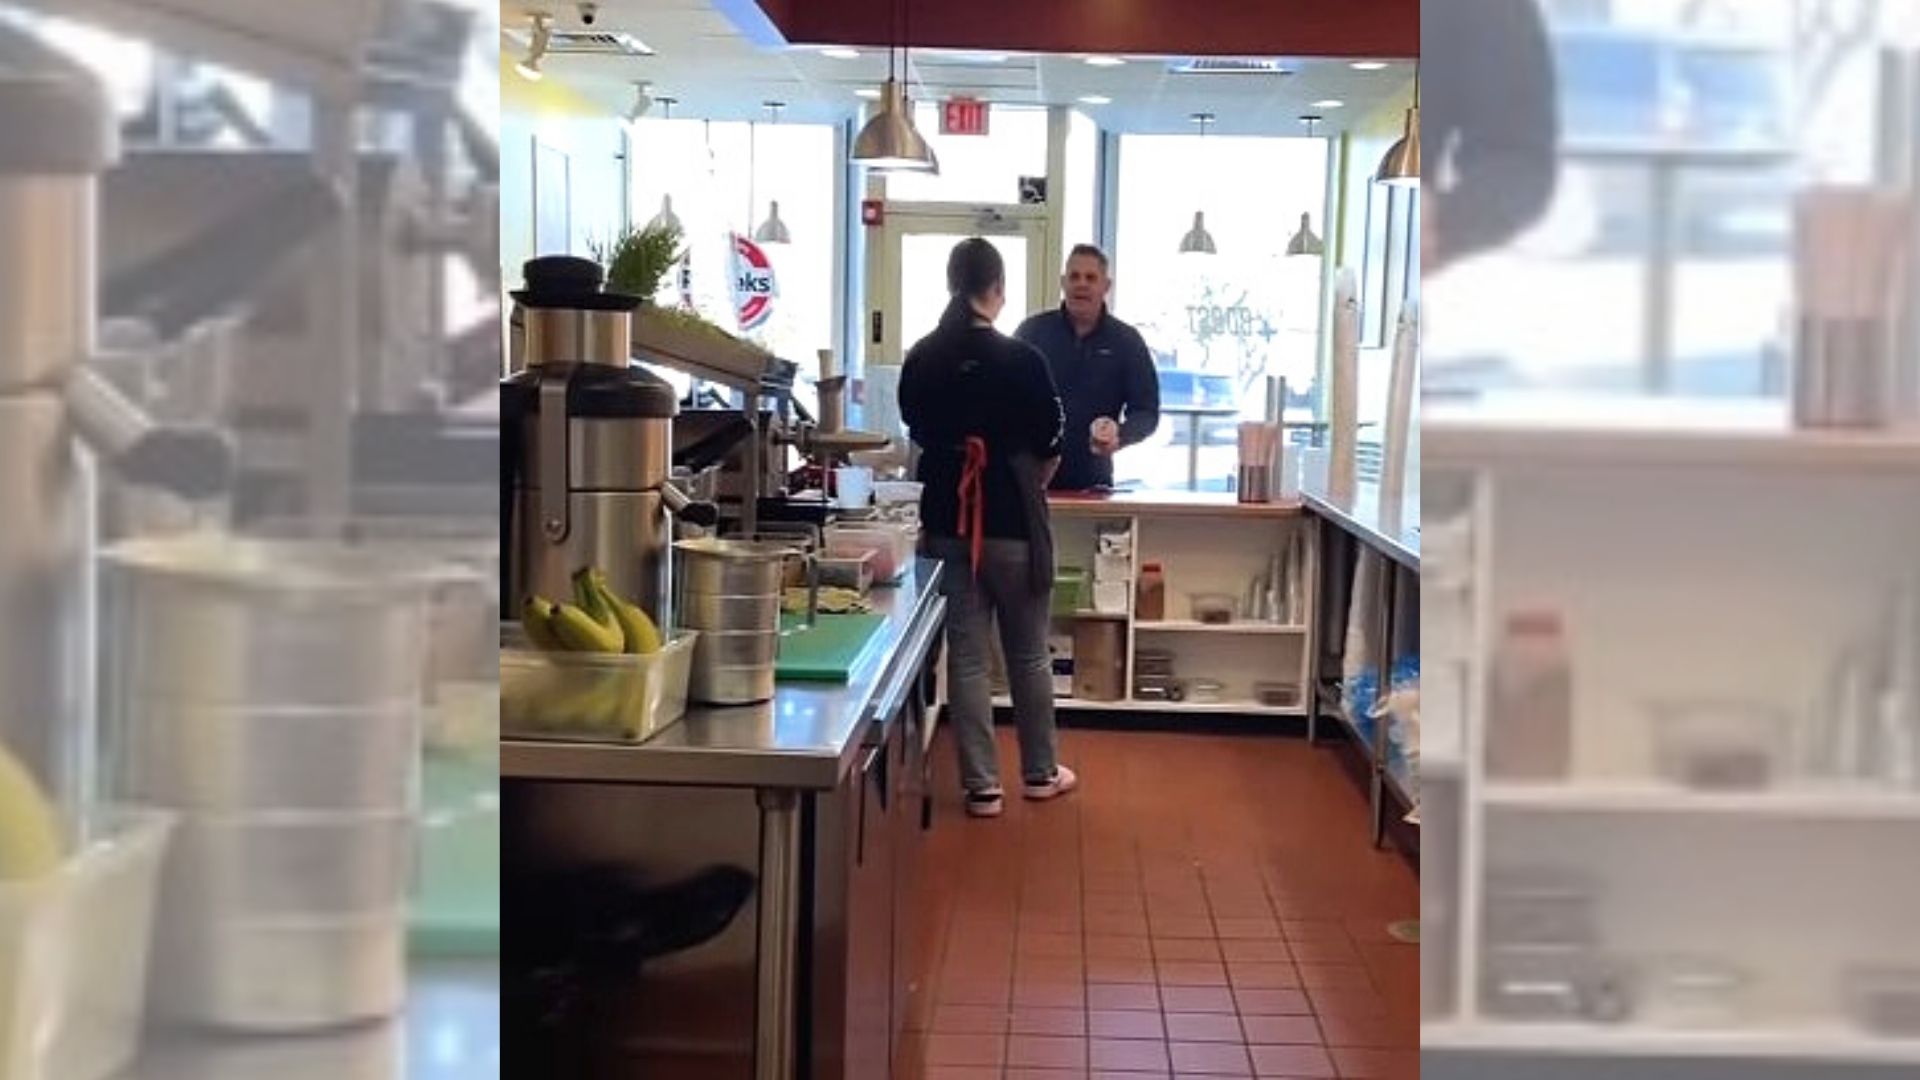 After a viral Tirade against smoothie shop employees, a Merrill Lynch advisor is fired